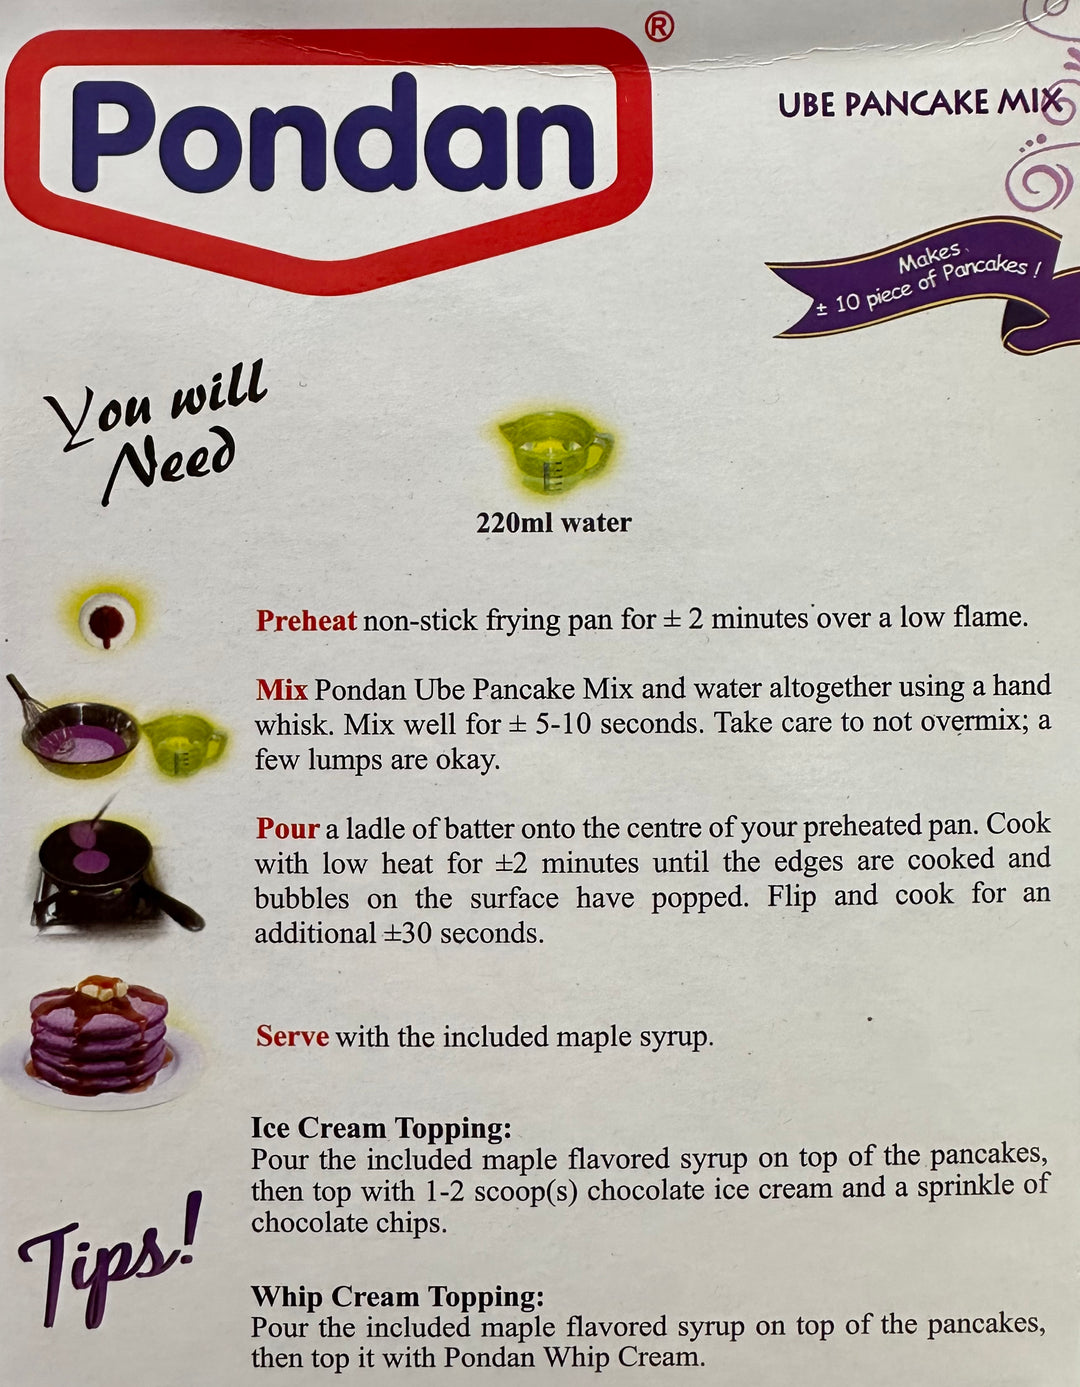 Pondon - Ube Pancake Mix - Maple Flavored Syrup Included 8.81 OZ